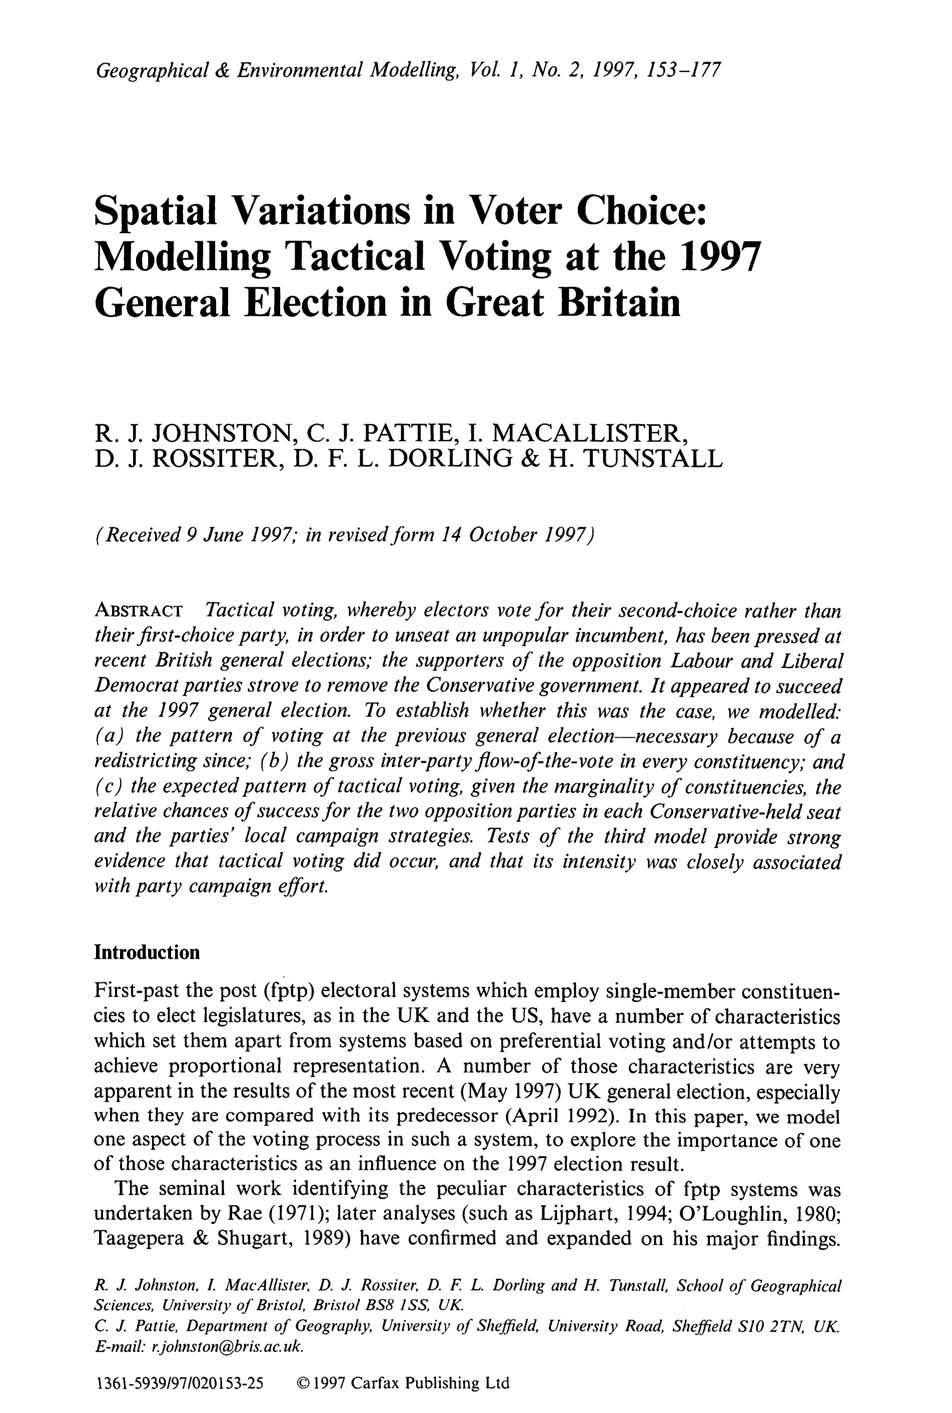 Geographical & Environmental Modelling, Vol. I, No. 2, 1997, 153-177 Spatial Variations in Voter Choice: Modelling Tactical Voting at the 1997 General Election in Great Britain R. J. JOHNSTON, C. J. PATTIE, I.